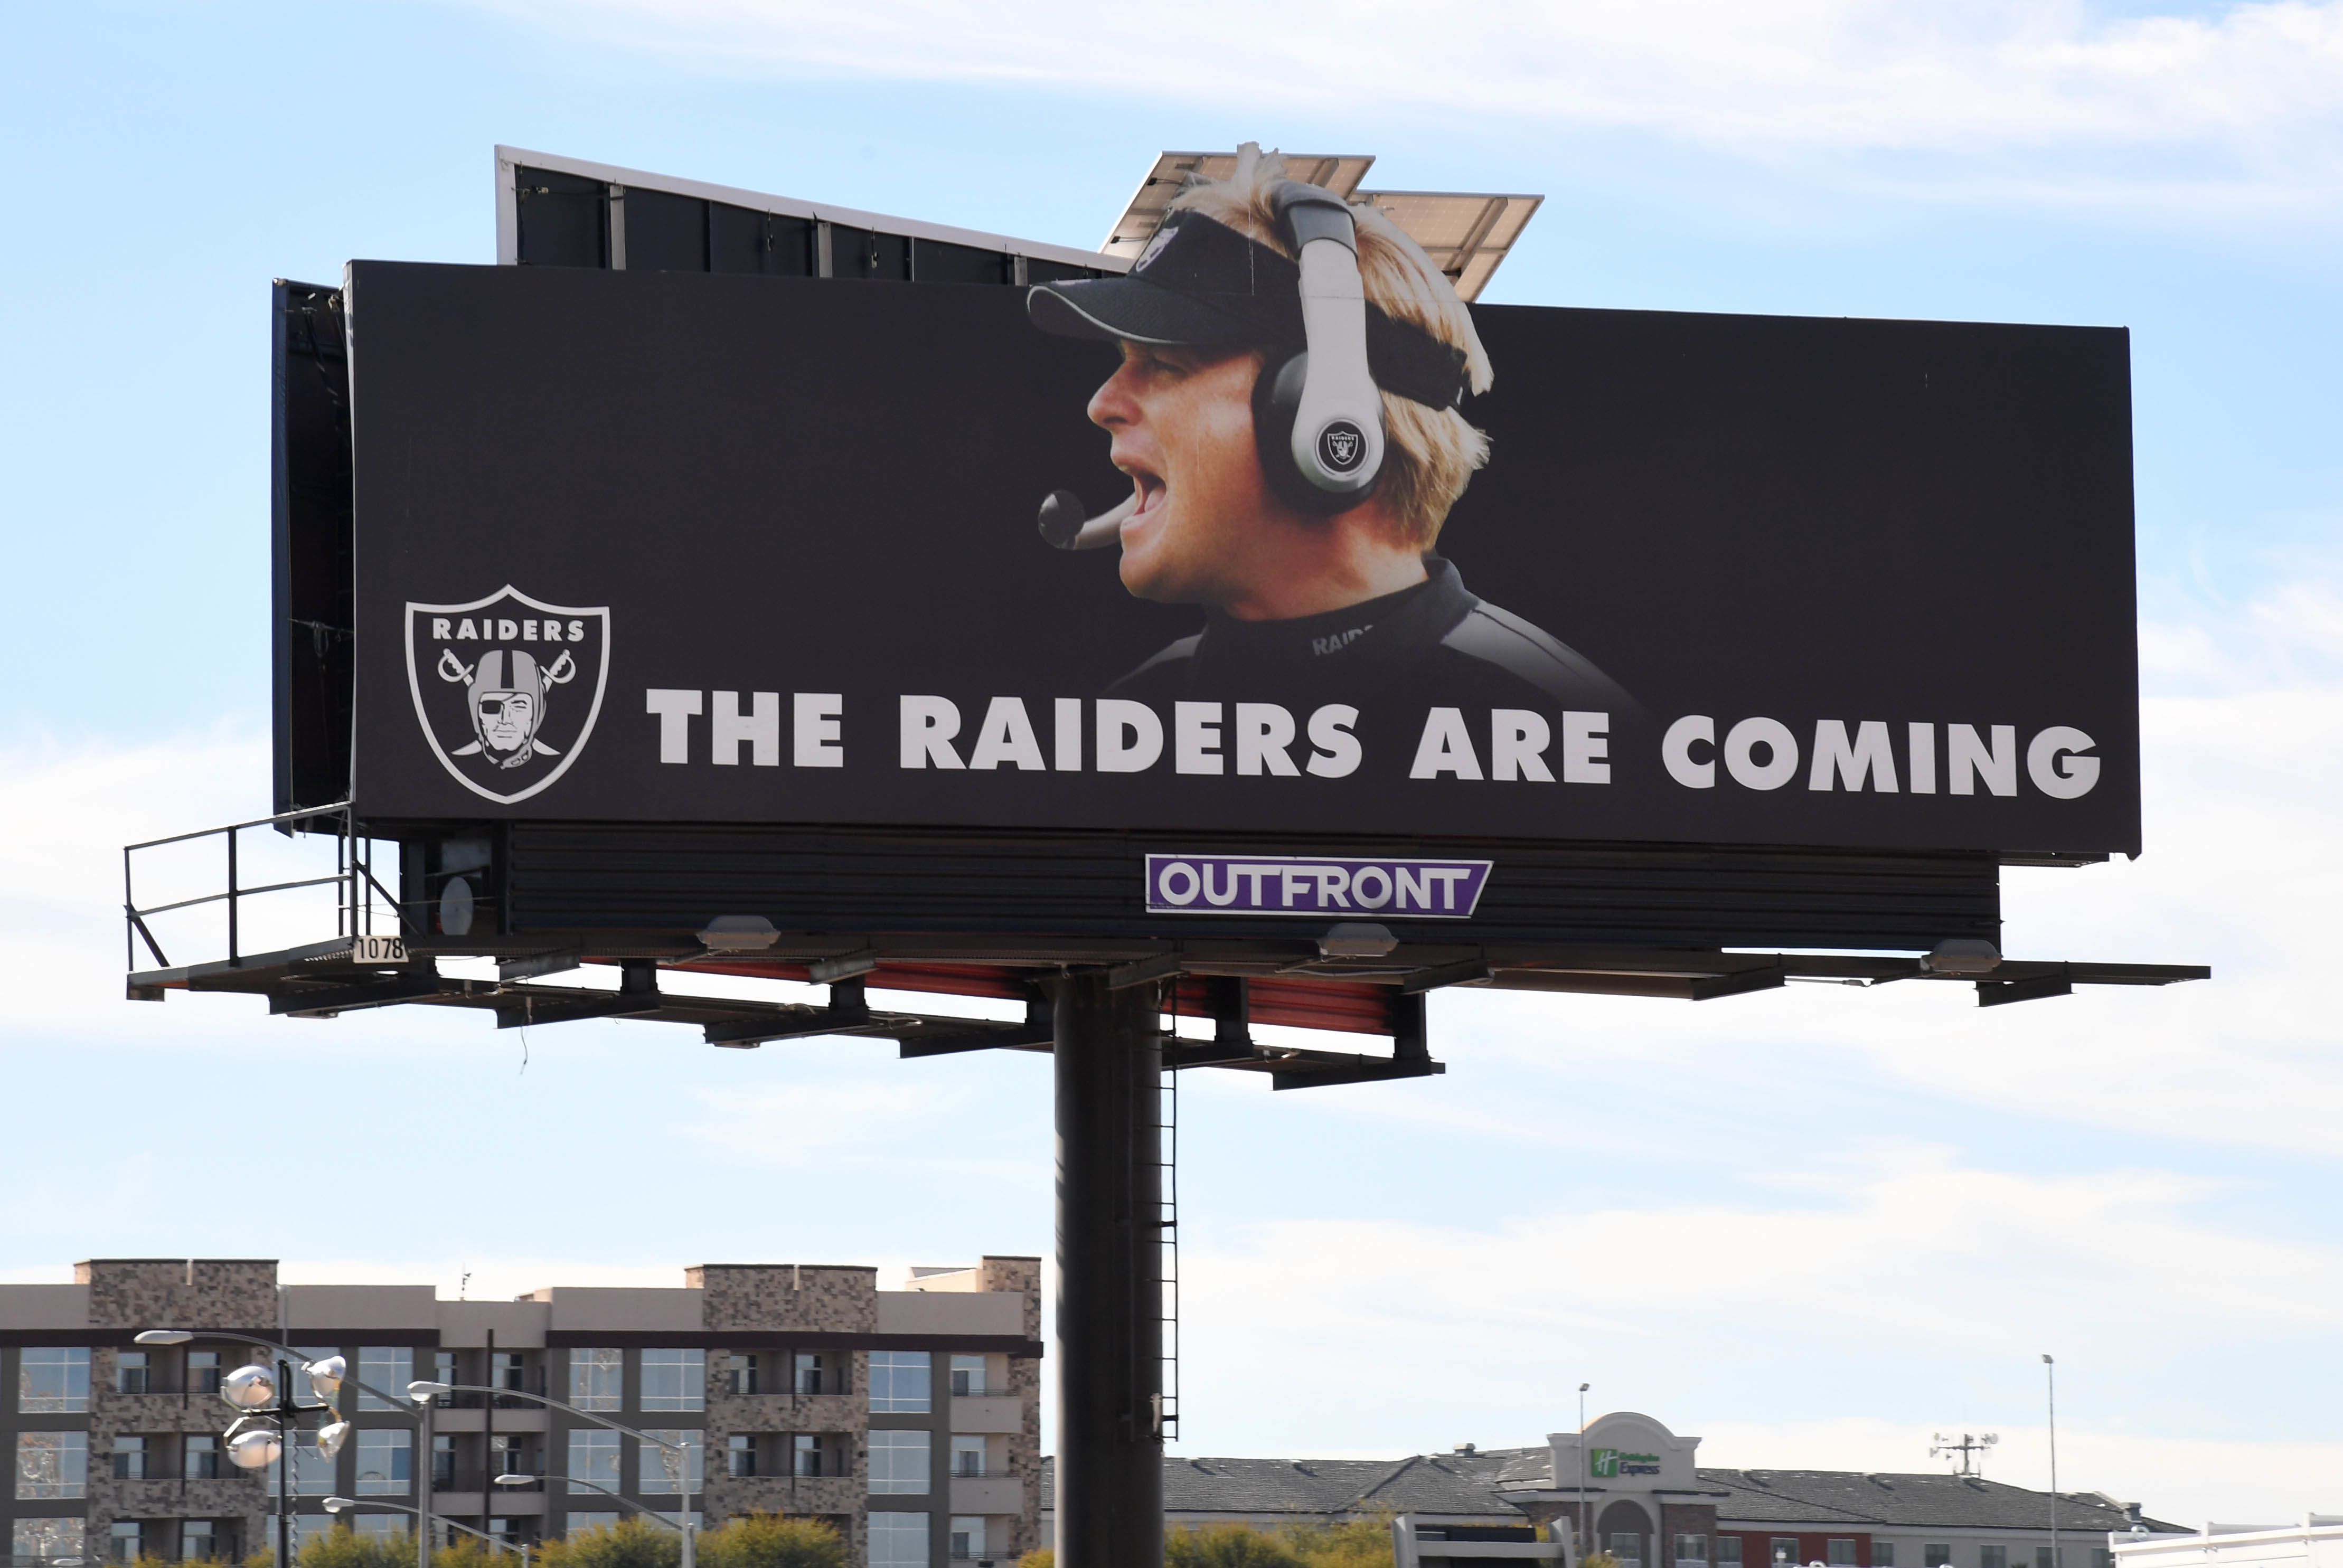 Las Vegas Raiders Merchandise, It's no surprise, Las Vegans LOVE the  Raiders! 😍 Make a splash at your next sporting event, concert, or  conference by having custom merchandise from the